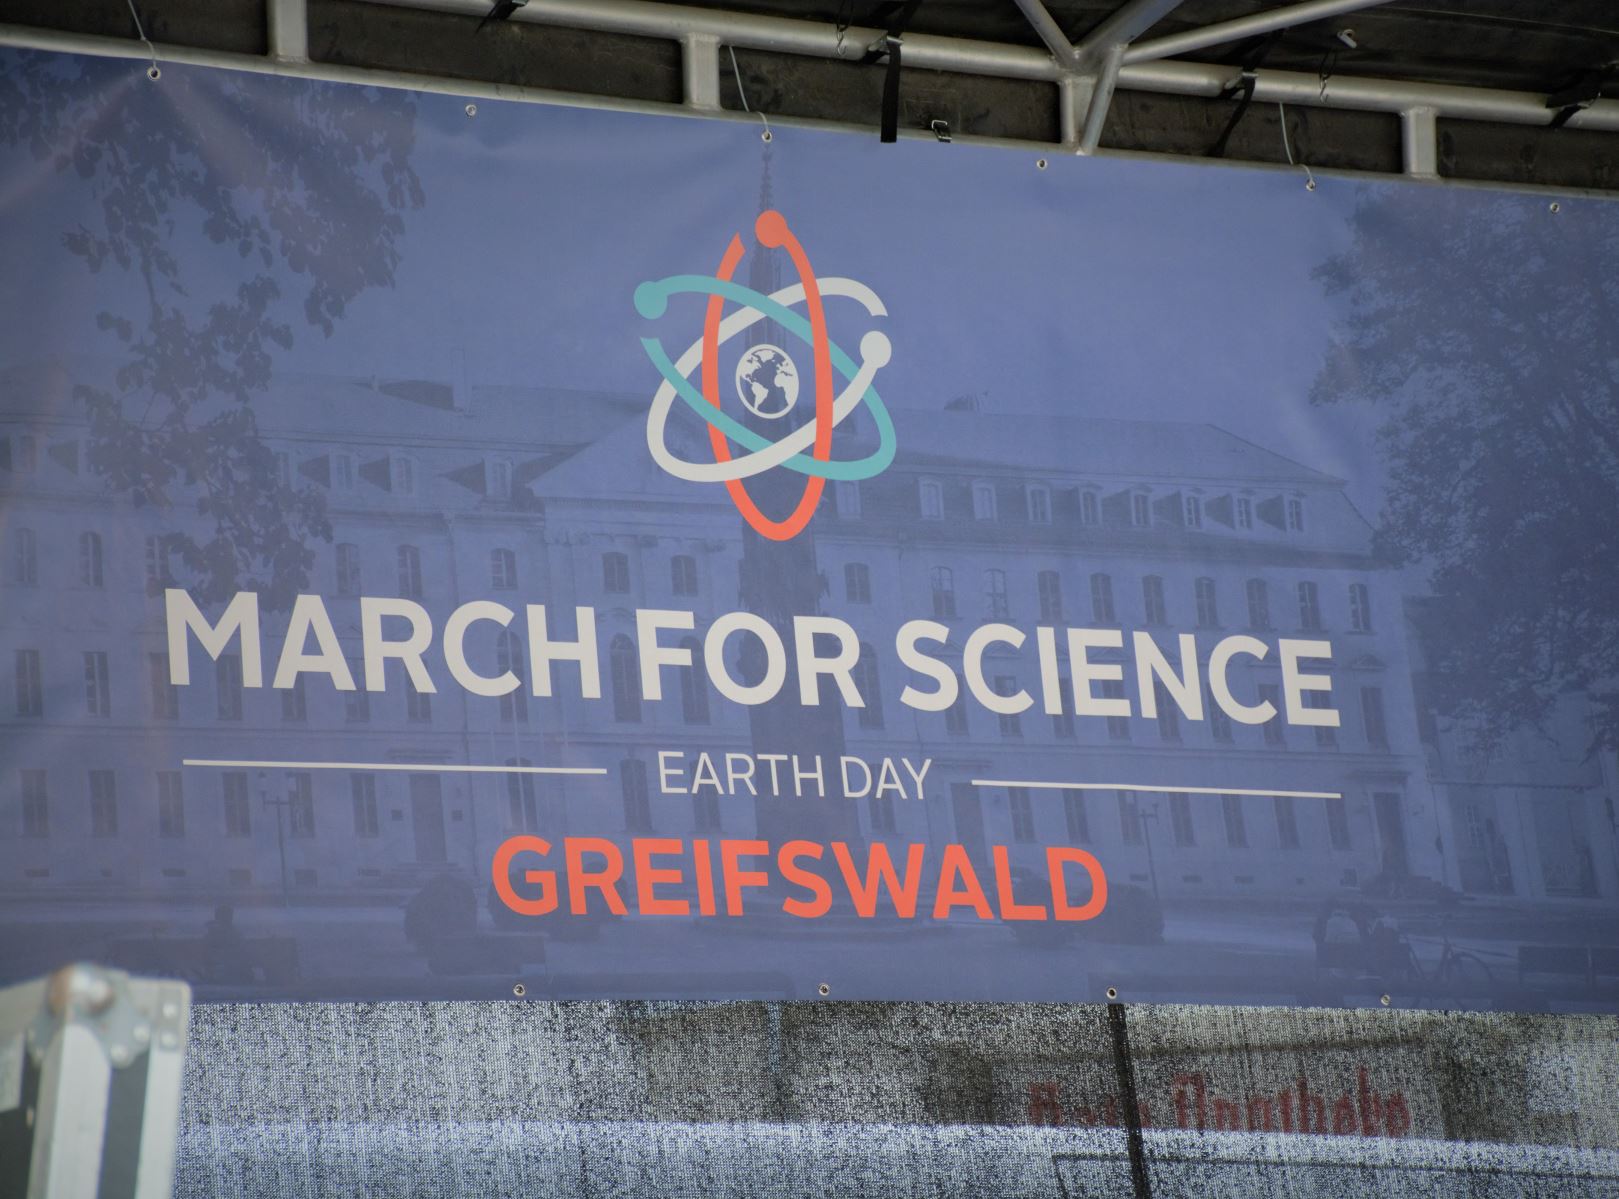 March-for-Science-Greifswald-Kundgebung